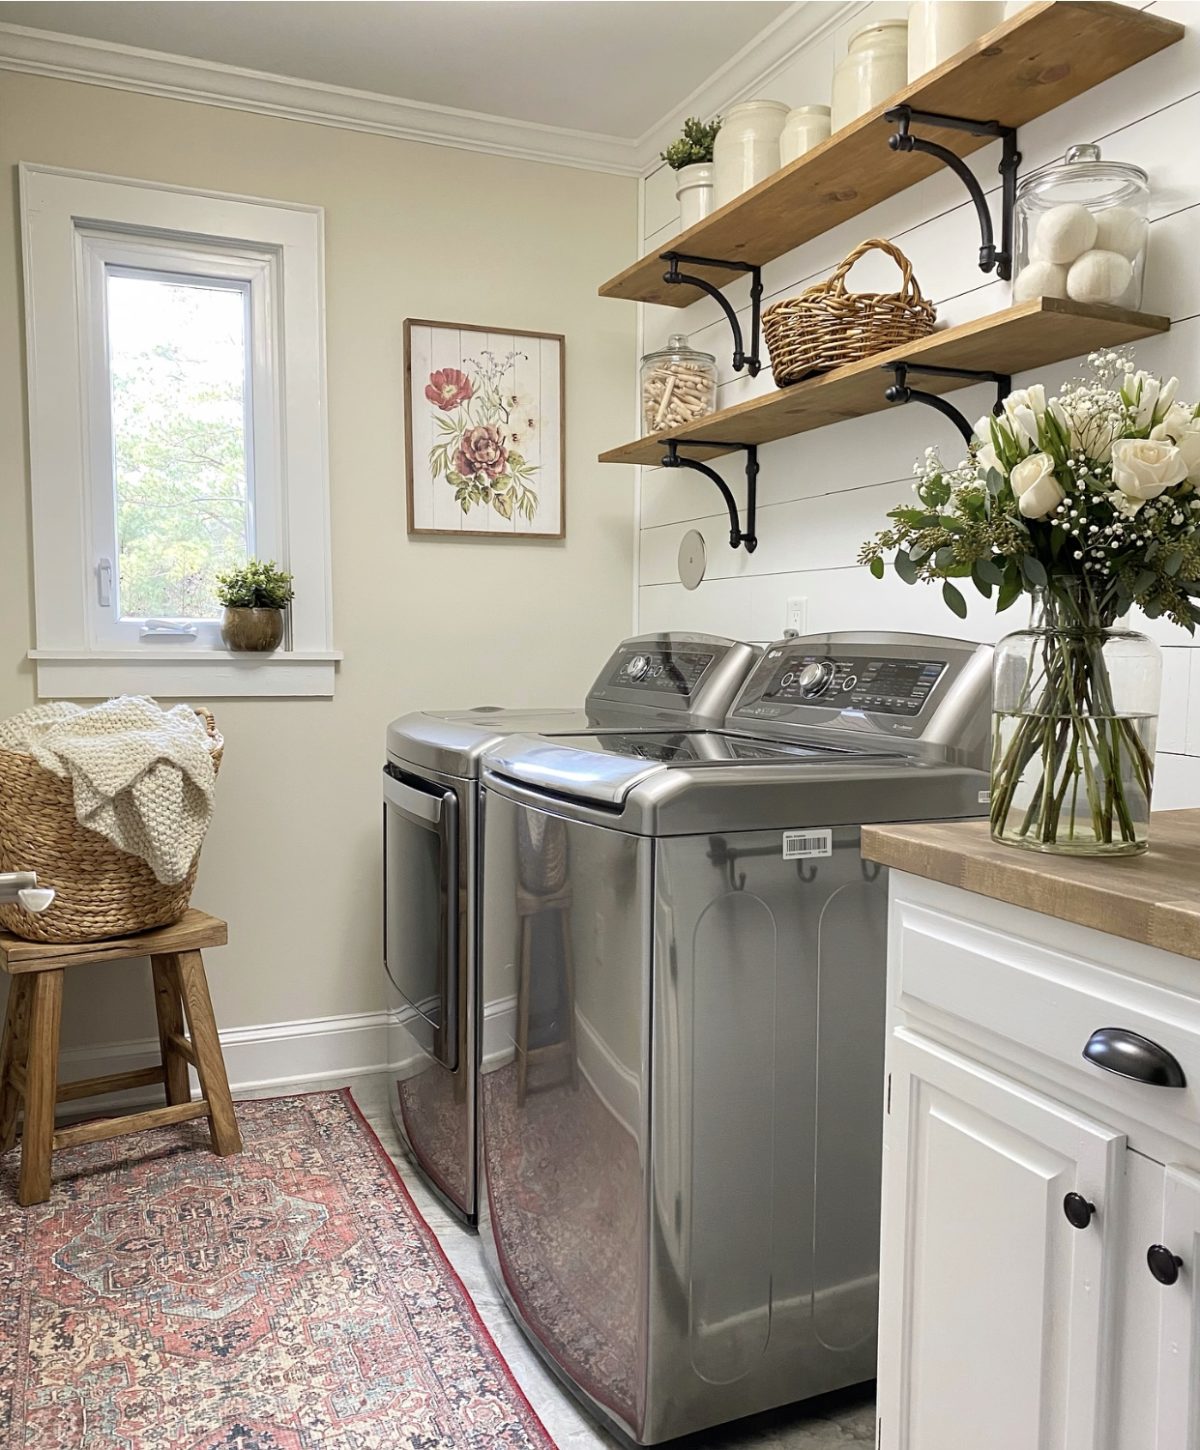 Laundry room with rug on the floor and open shelving.